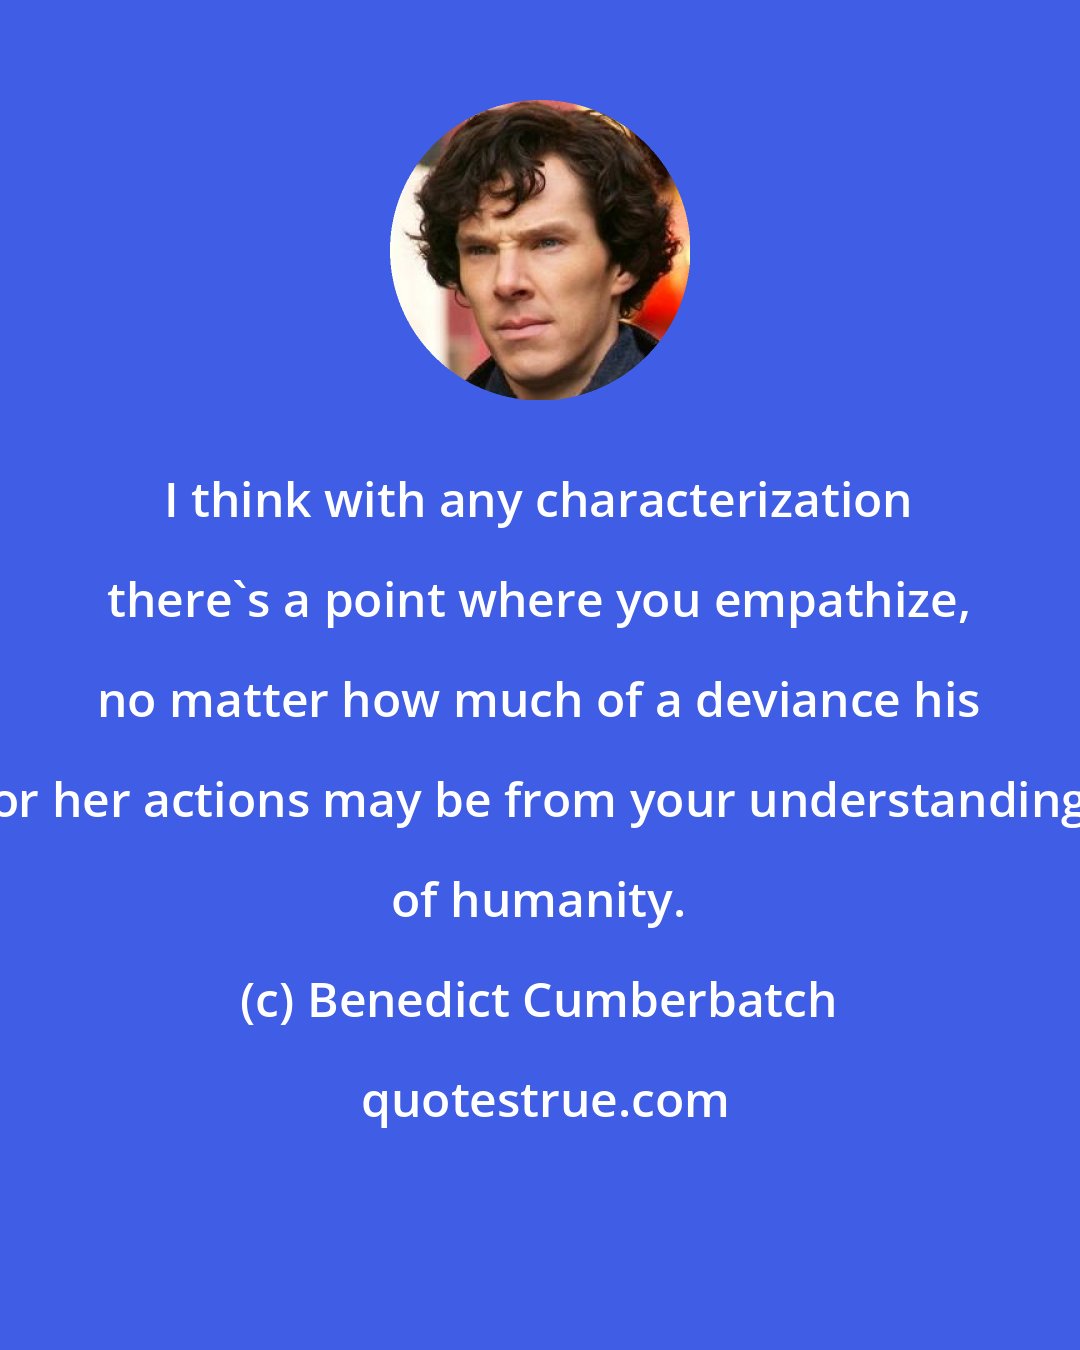 Benedict Cumberbatch: I think with any characterization there's a point where you empathize, no matter how much of a deviance his or her actions may be from your understanding of humanity.